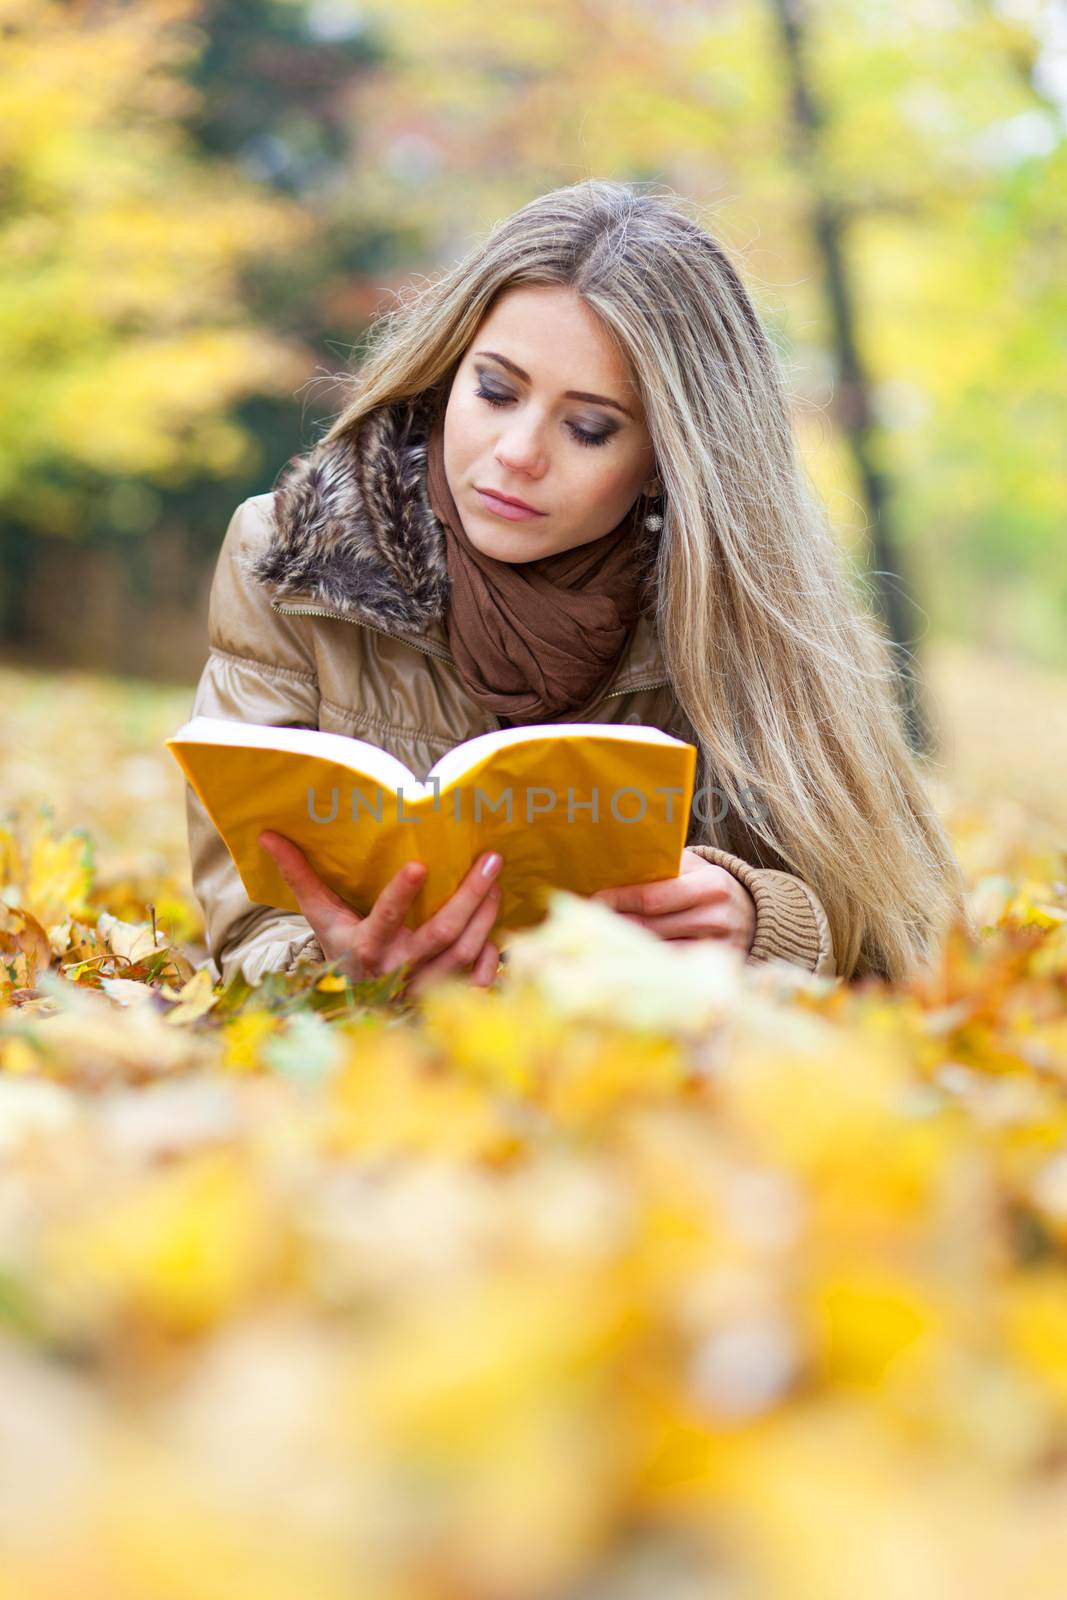 Cute young woman reading in a park in autumn
 by TristanBM